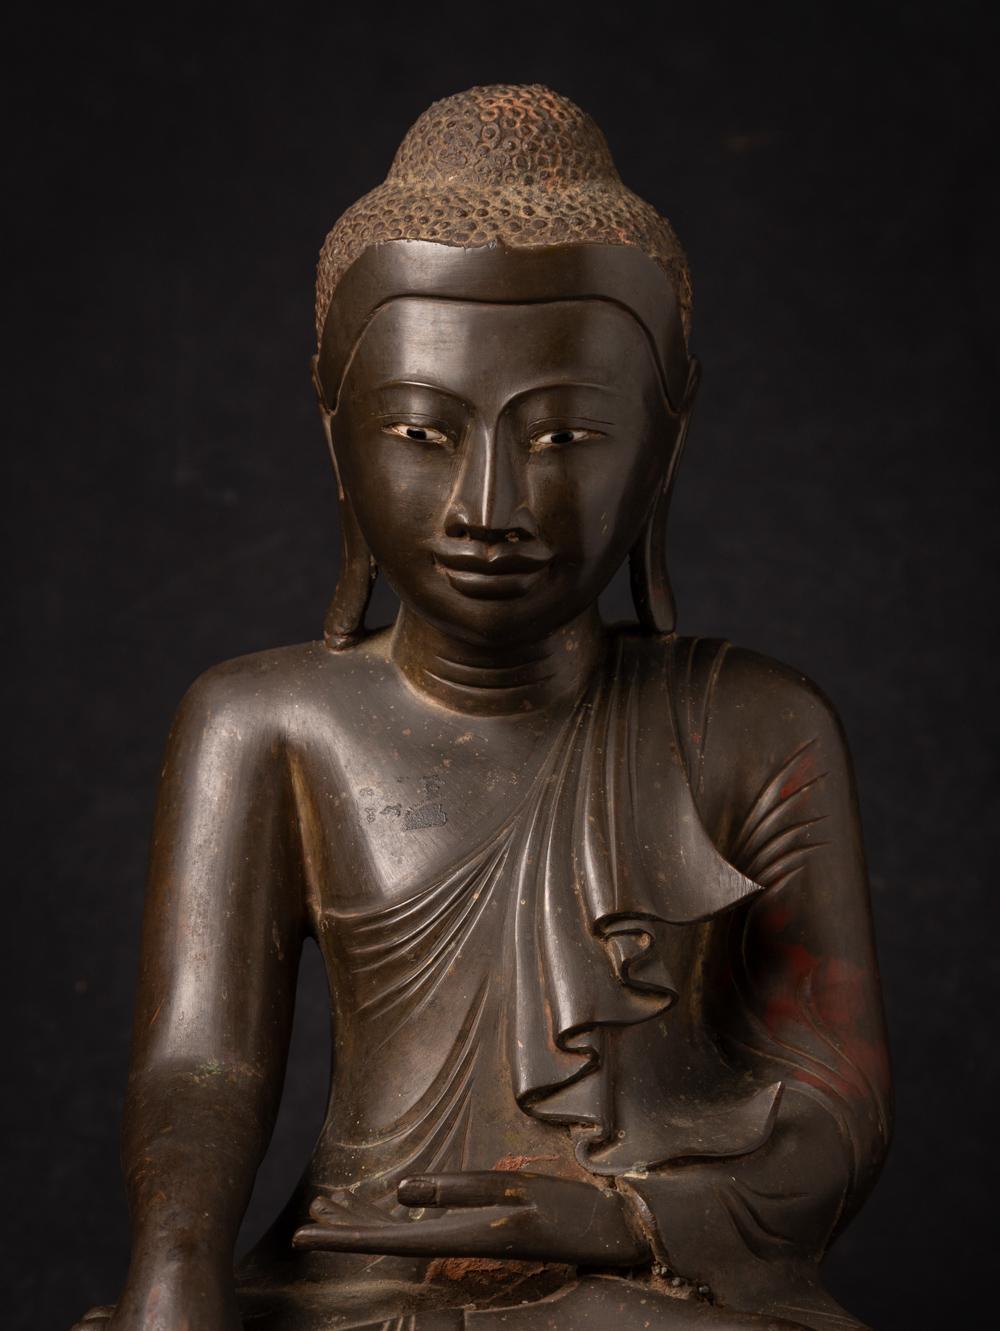 This antique bronze Buddha statue is a truly unique and special collectible piece. Standing at 44 cm high, 34 cm wide, and 24.8 cm deep, it is made of bronze and it is in Mandalay style, depicting the Bhumisparsha mudra. This statue is believed to